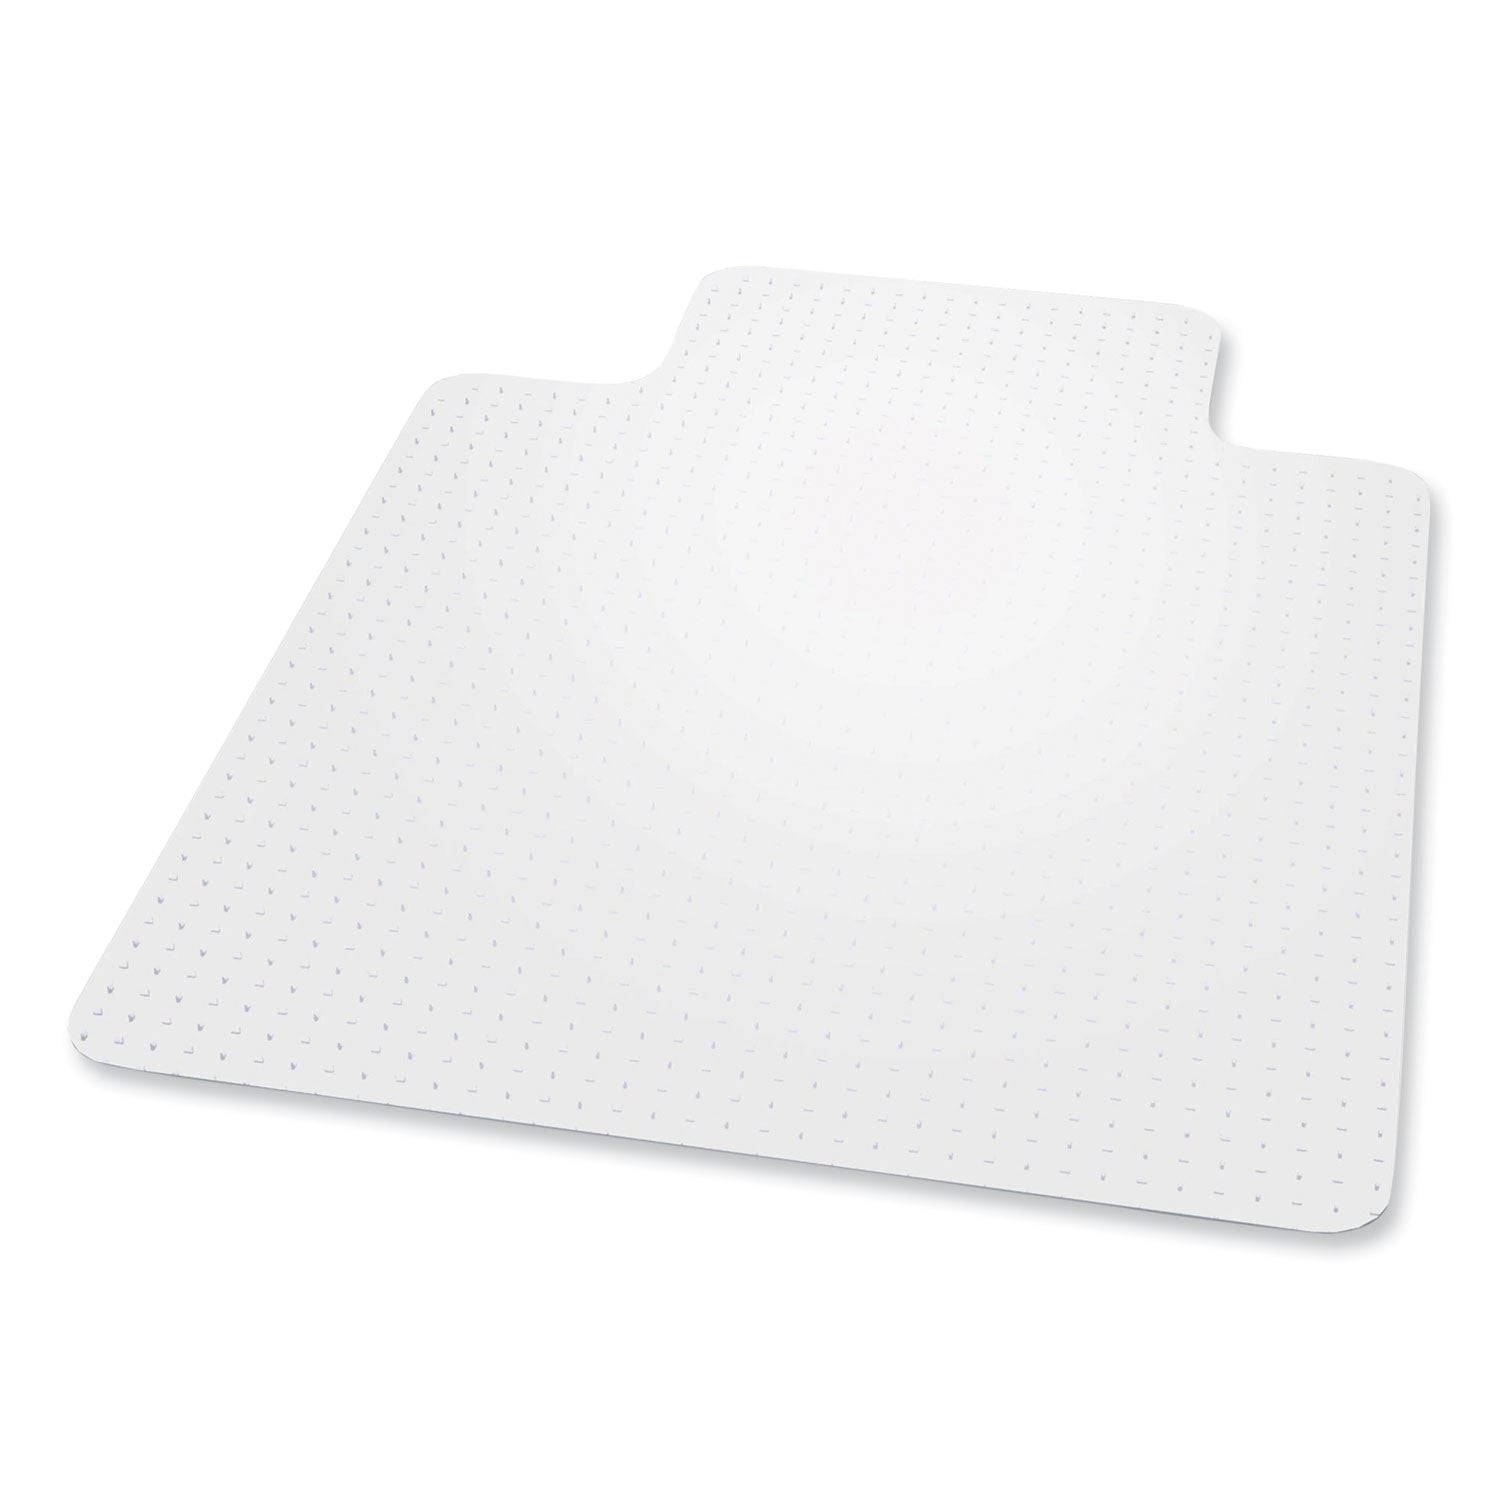 everlife-chair-mat-for-extra-high-pile-carpet-wih-lip-45-x-53-clear-ships-in-4-6-business-days_esr124183 - 1